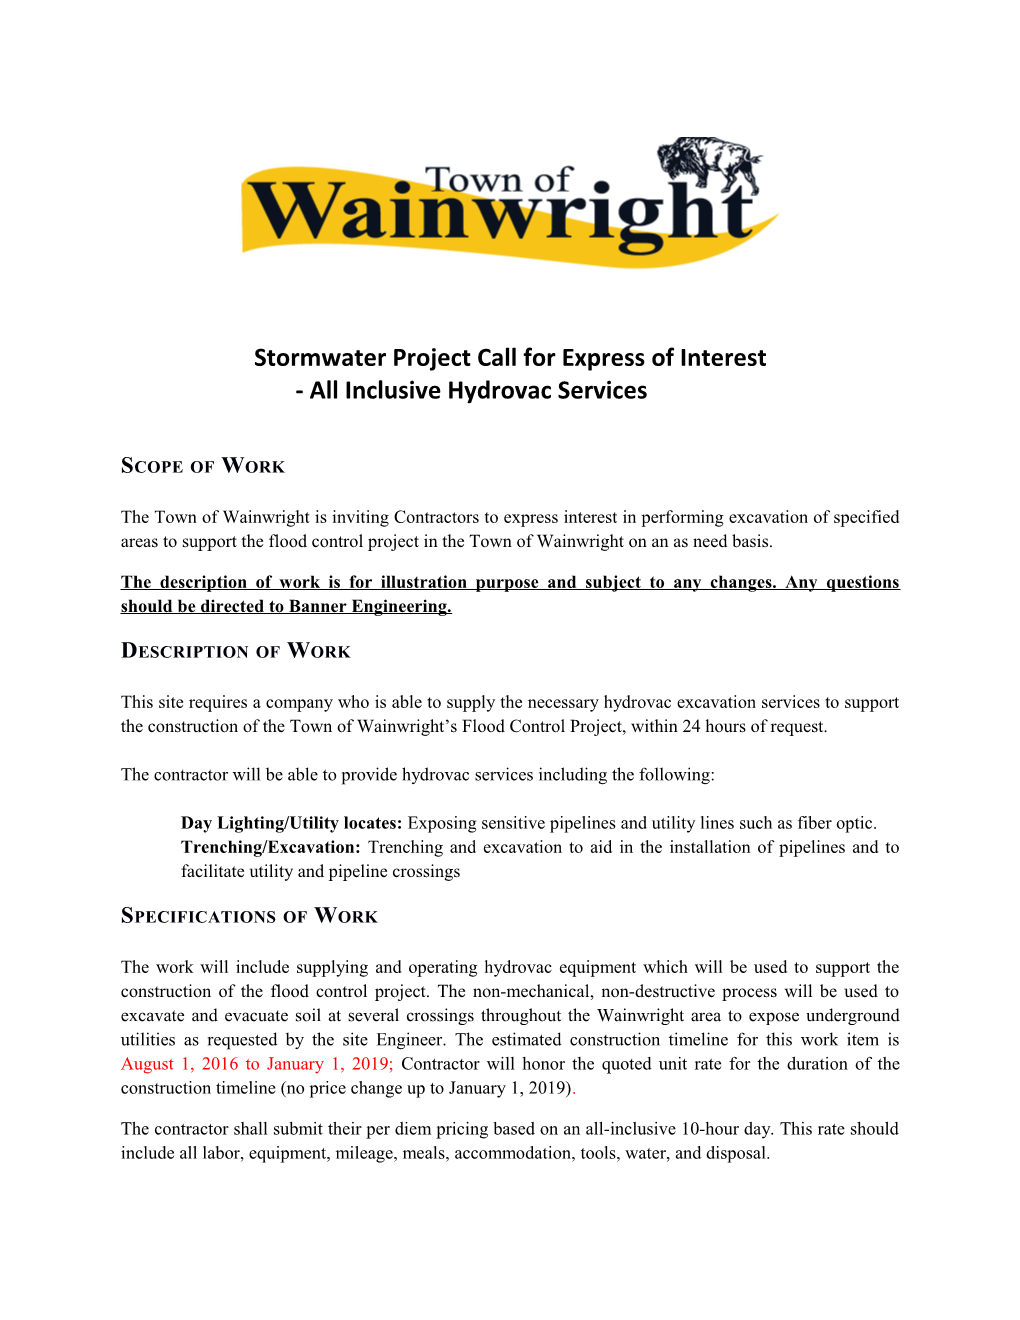 Stormwater Project Call for Express of Interest